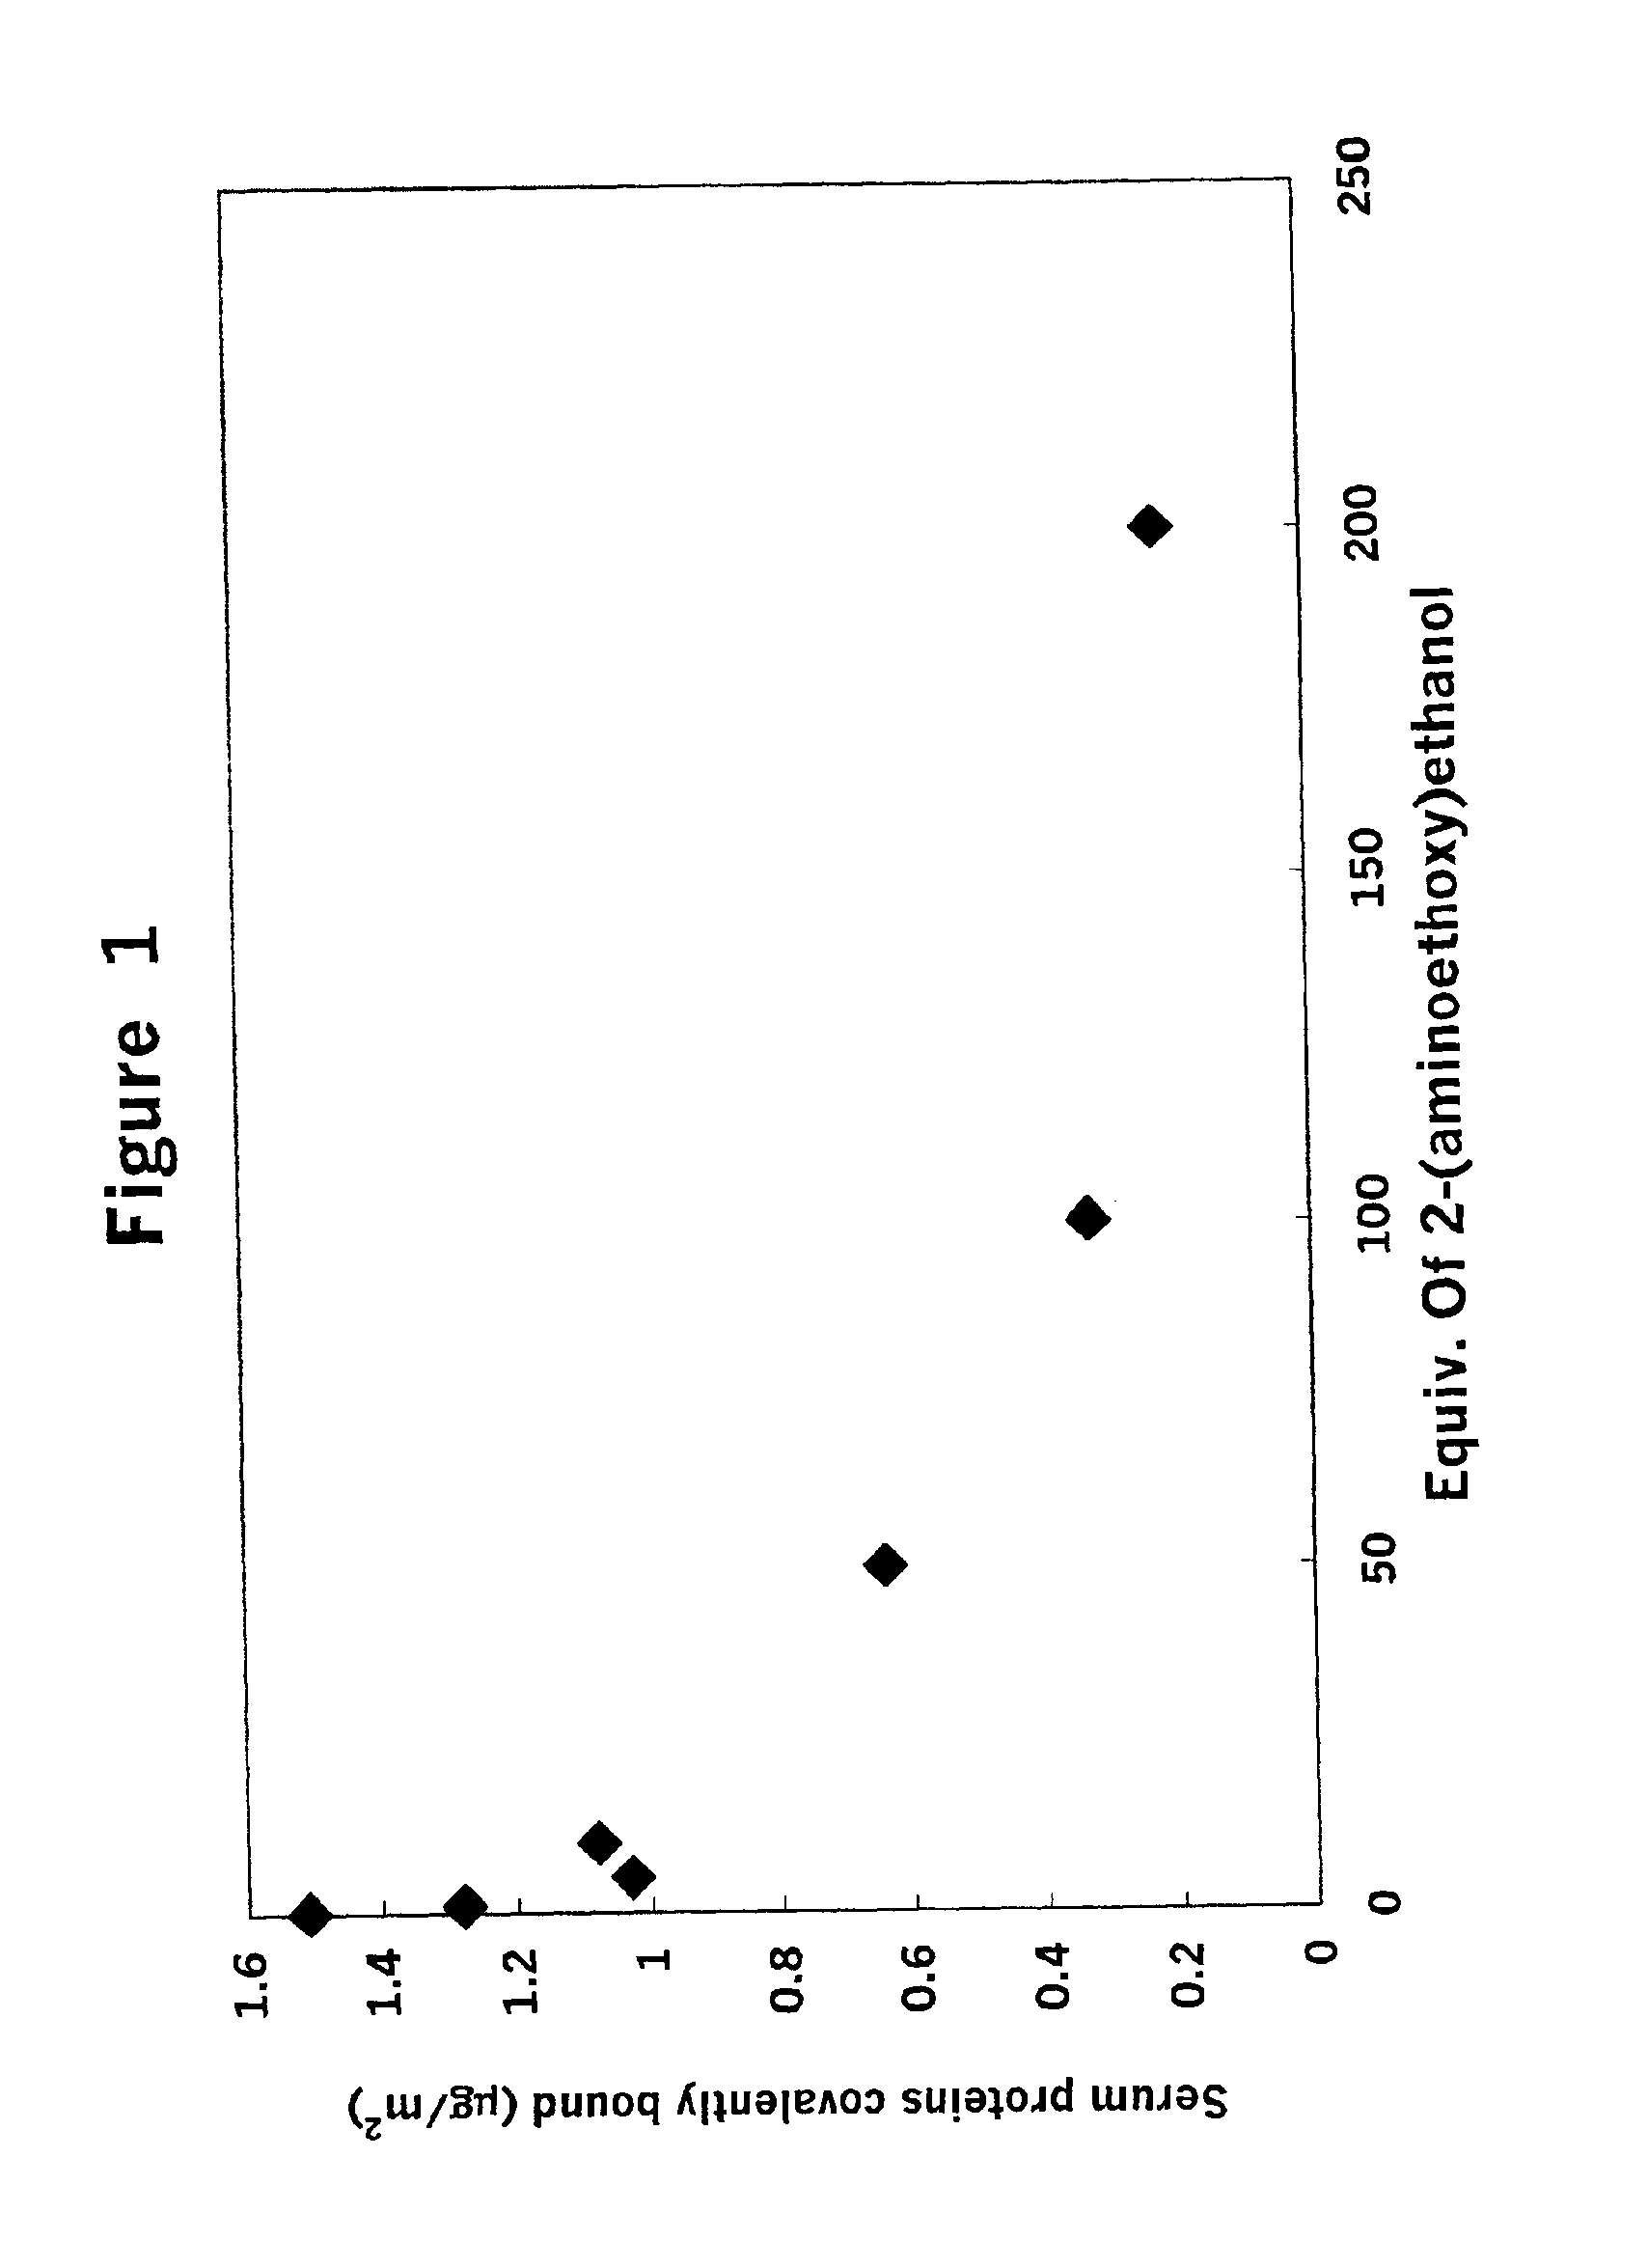 Particles for immunoassays and methods for treating the same